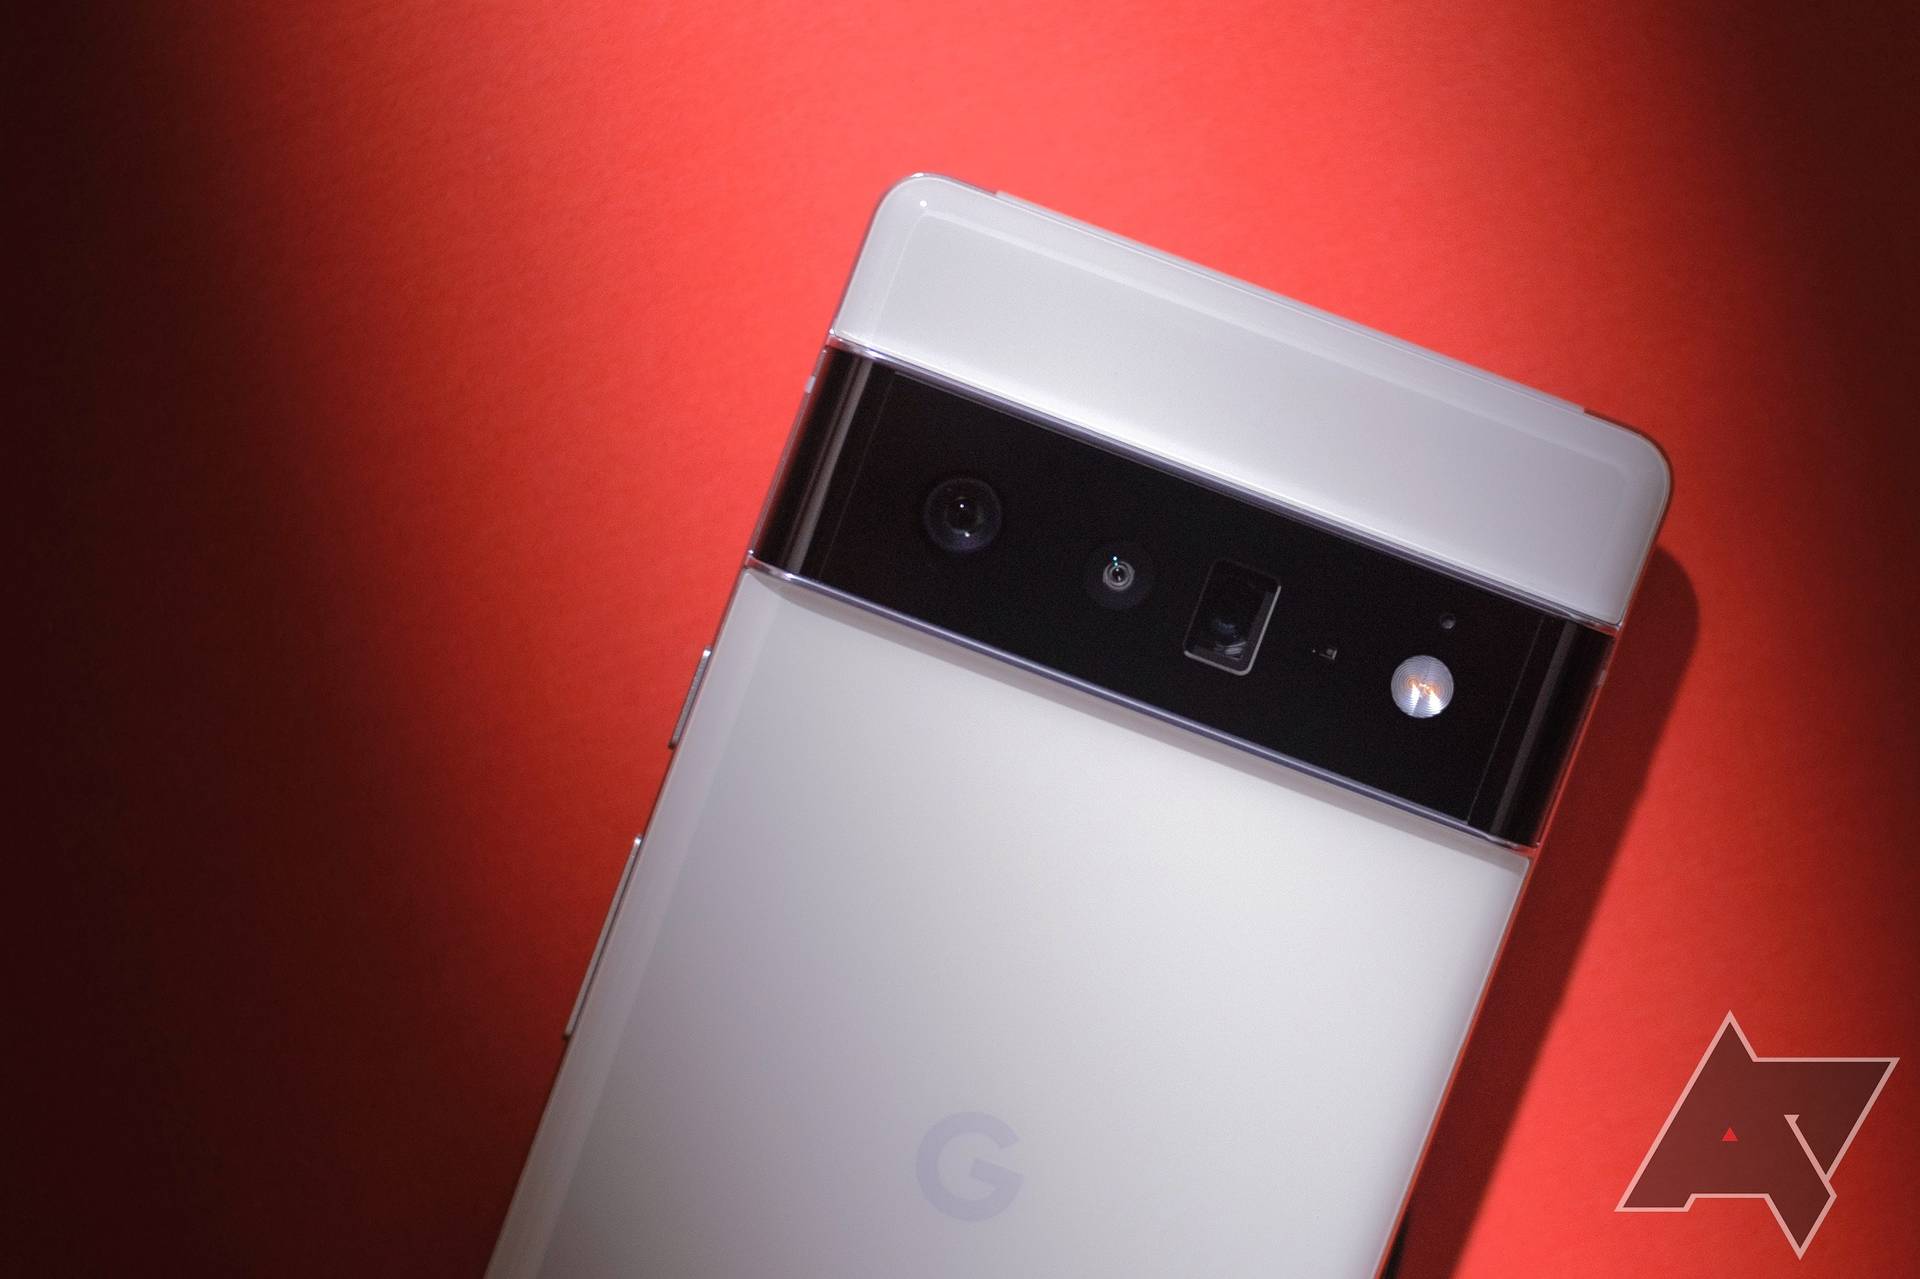 The Google Pixel 7 might not upgrade one important key feature over the Pixel 6